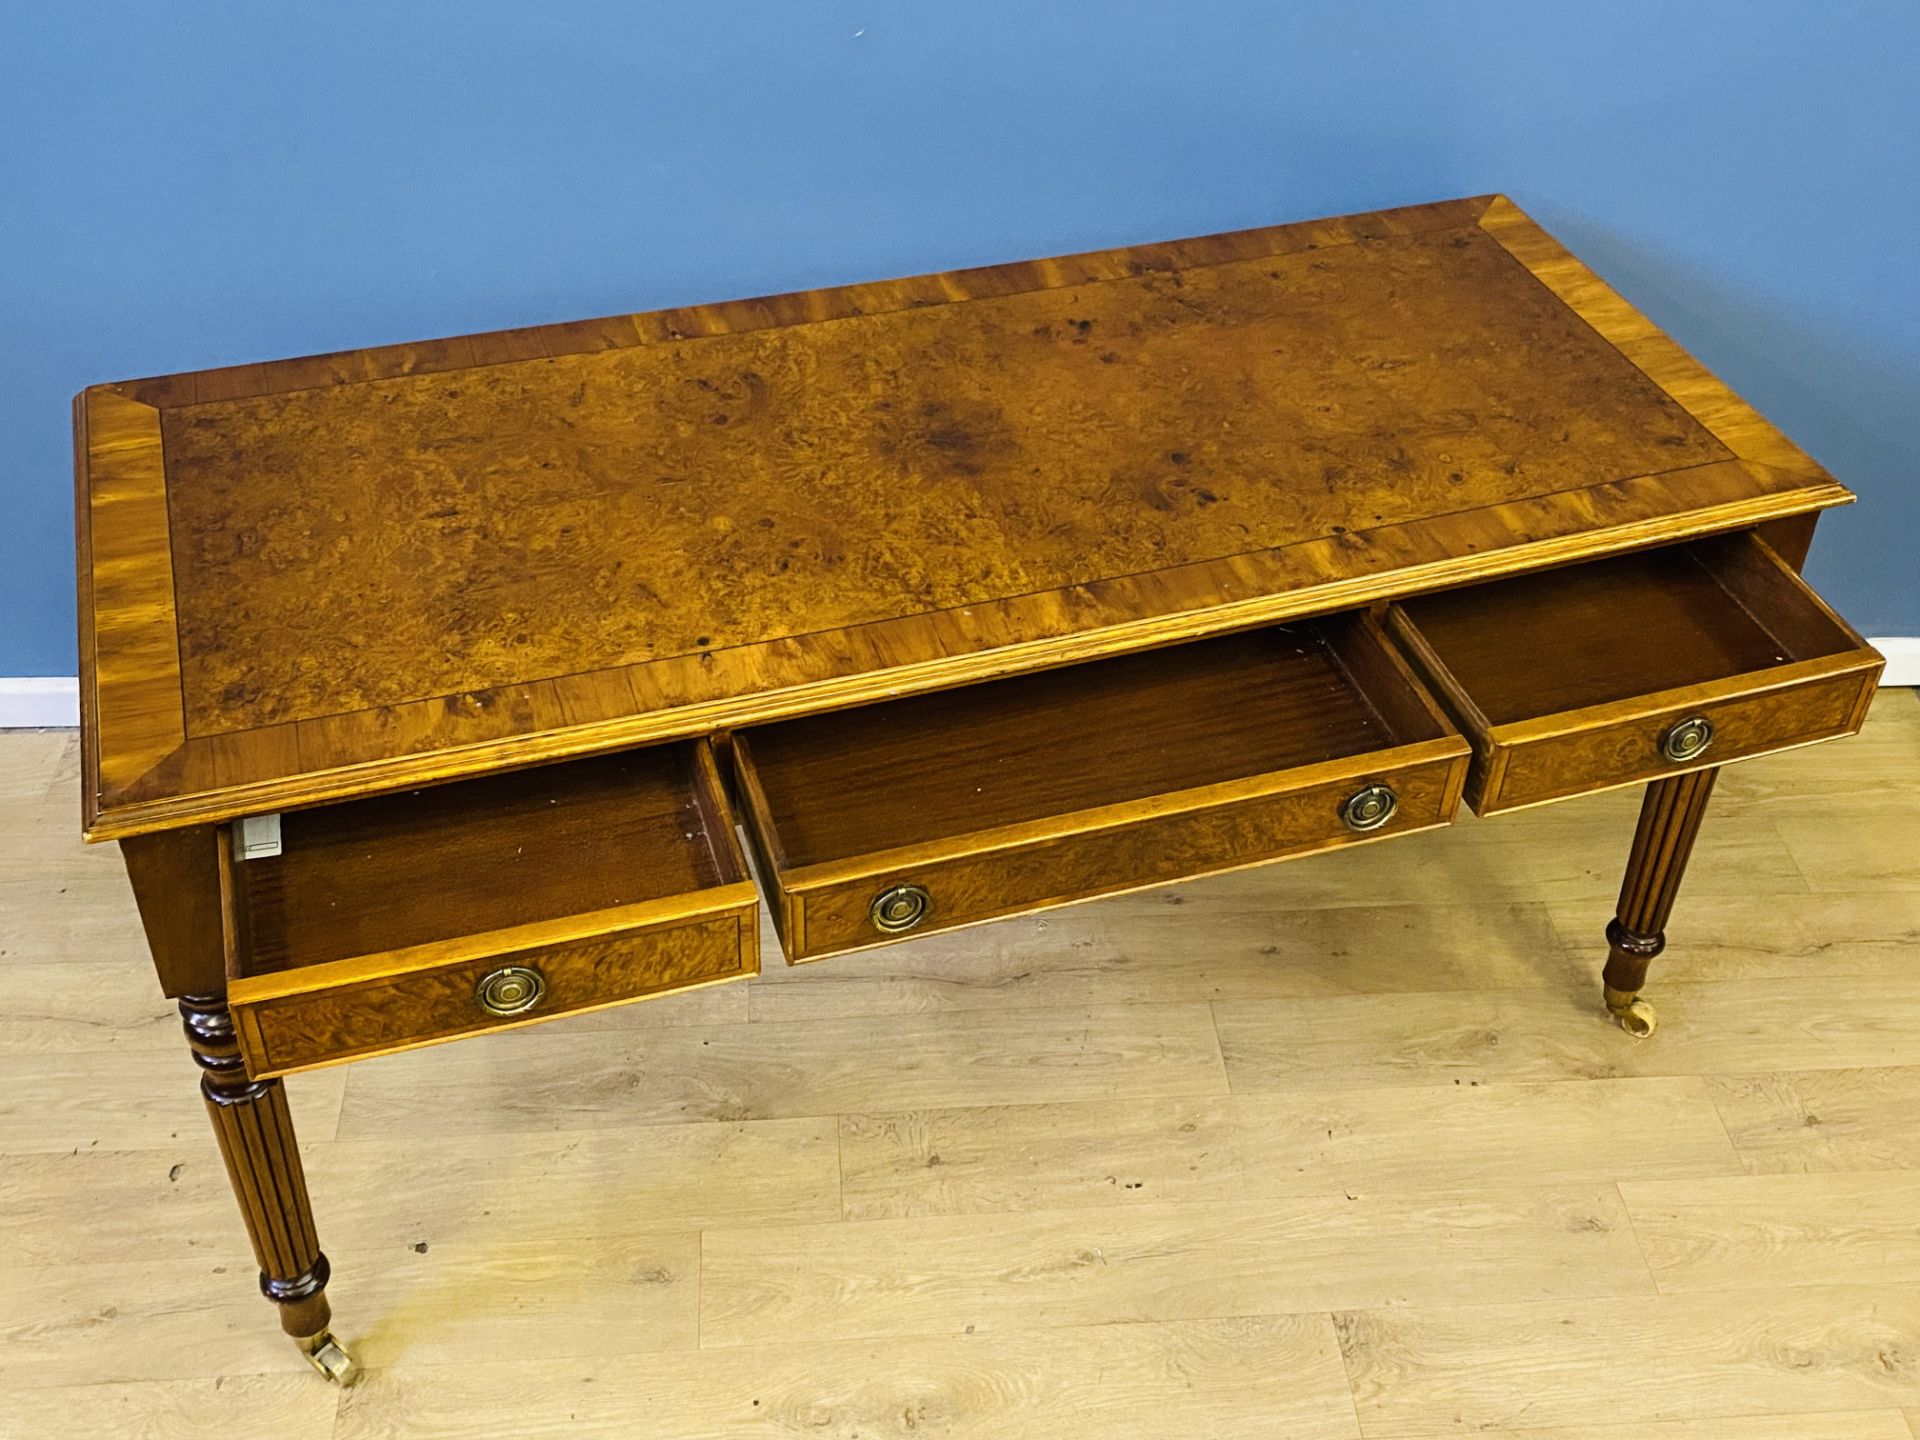 Reproduction burr walnut writing table - Image 7 of 7